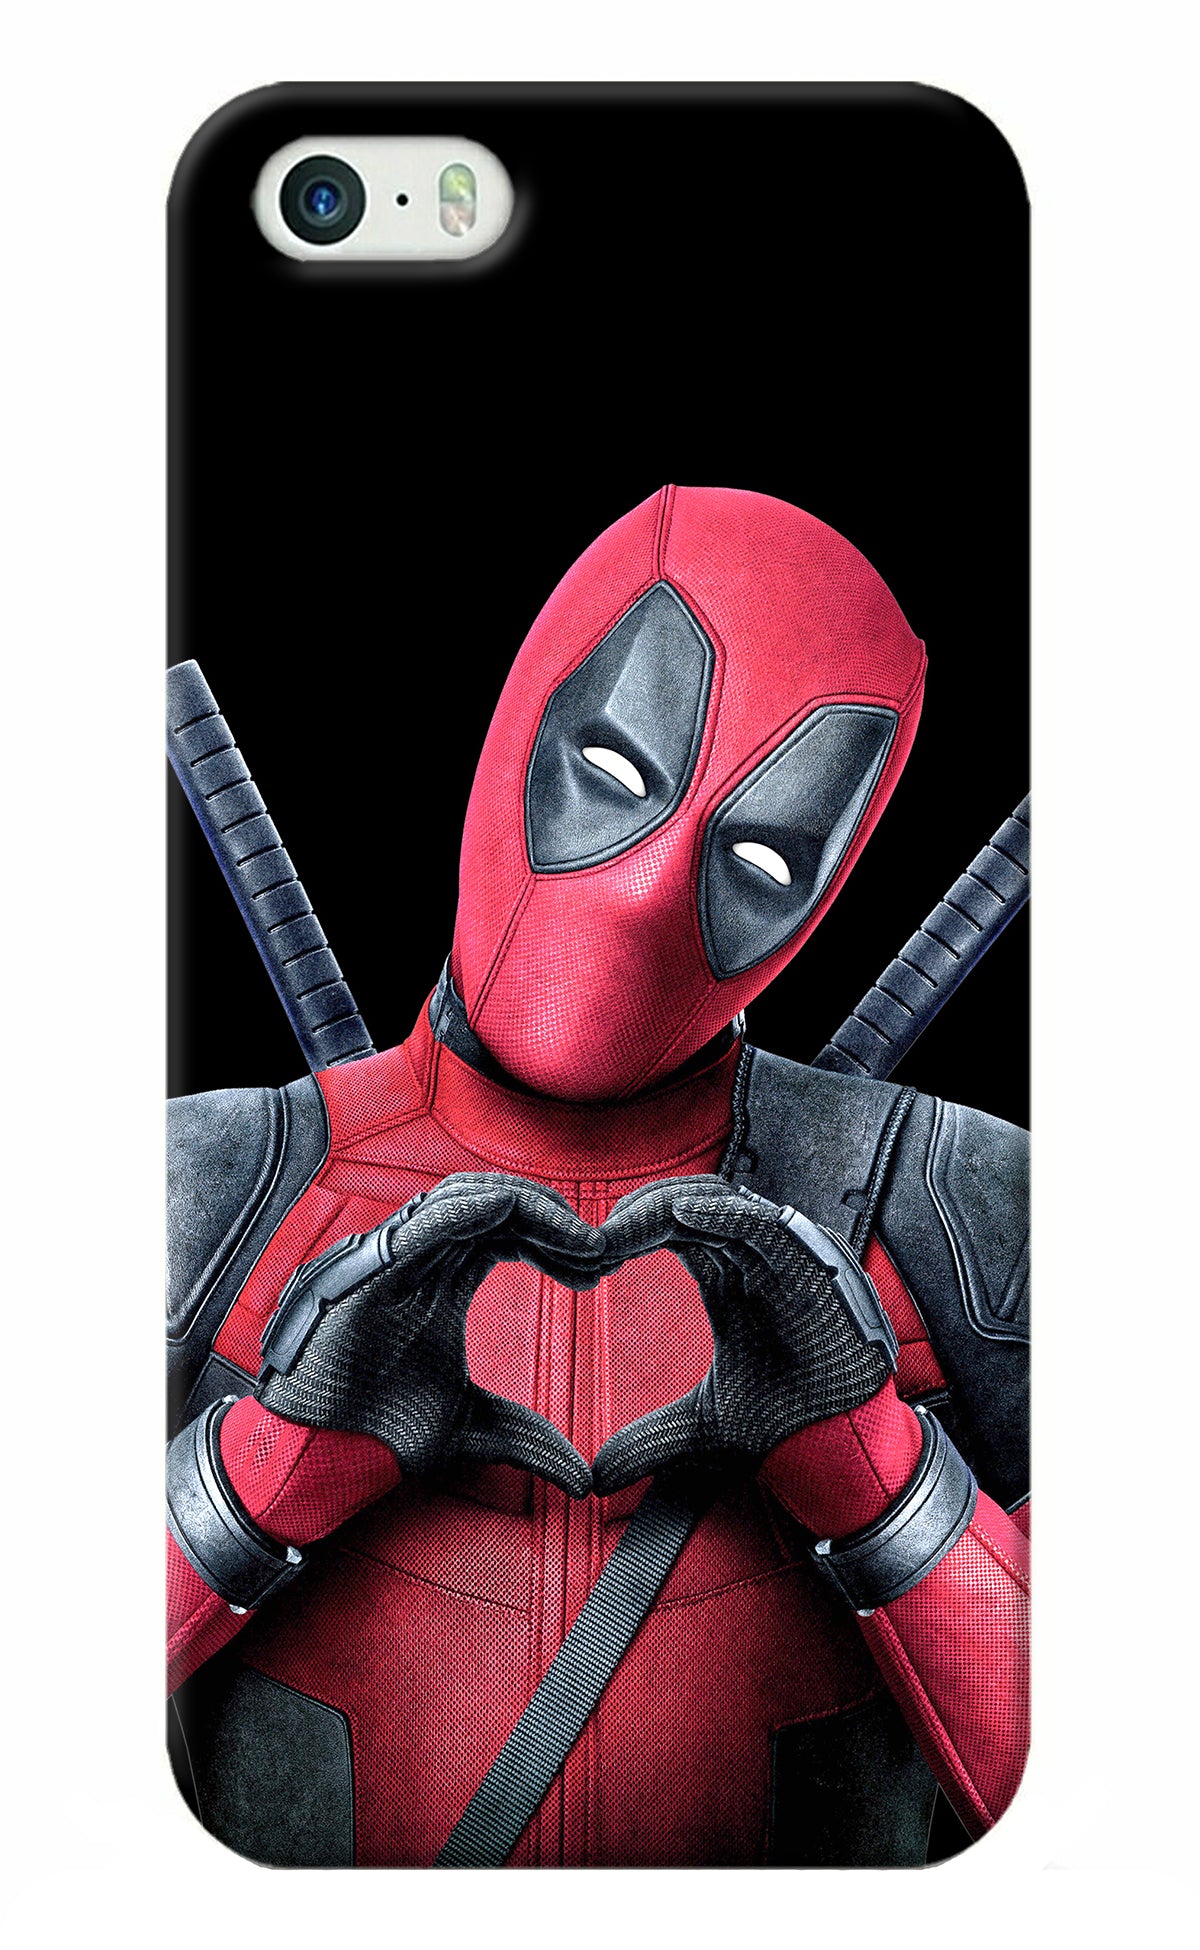 Deadpool iPhone 5/5s Back Cover